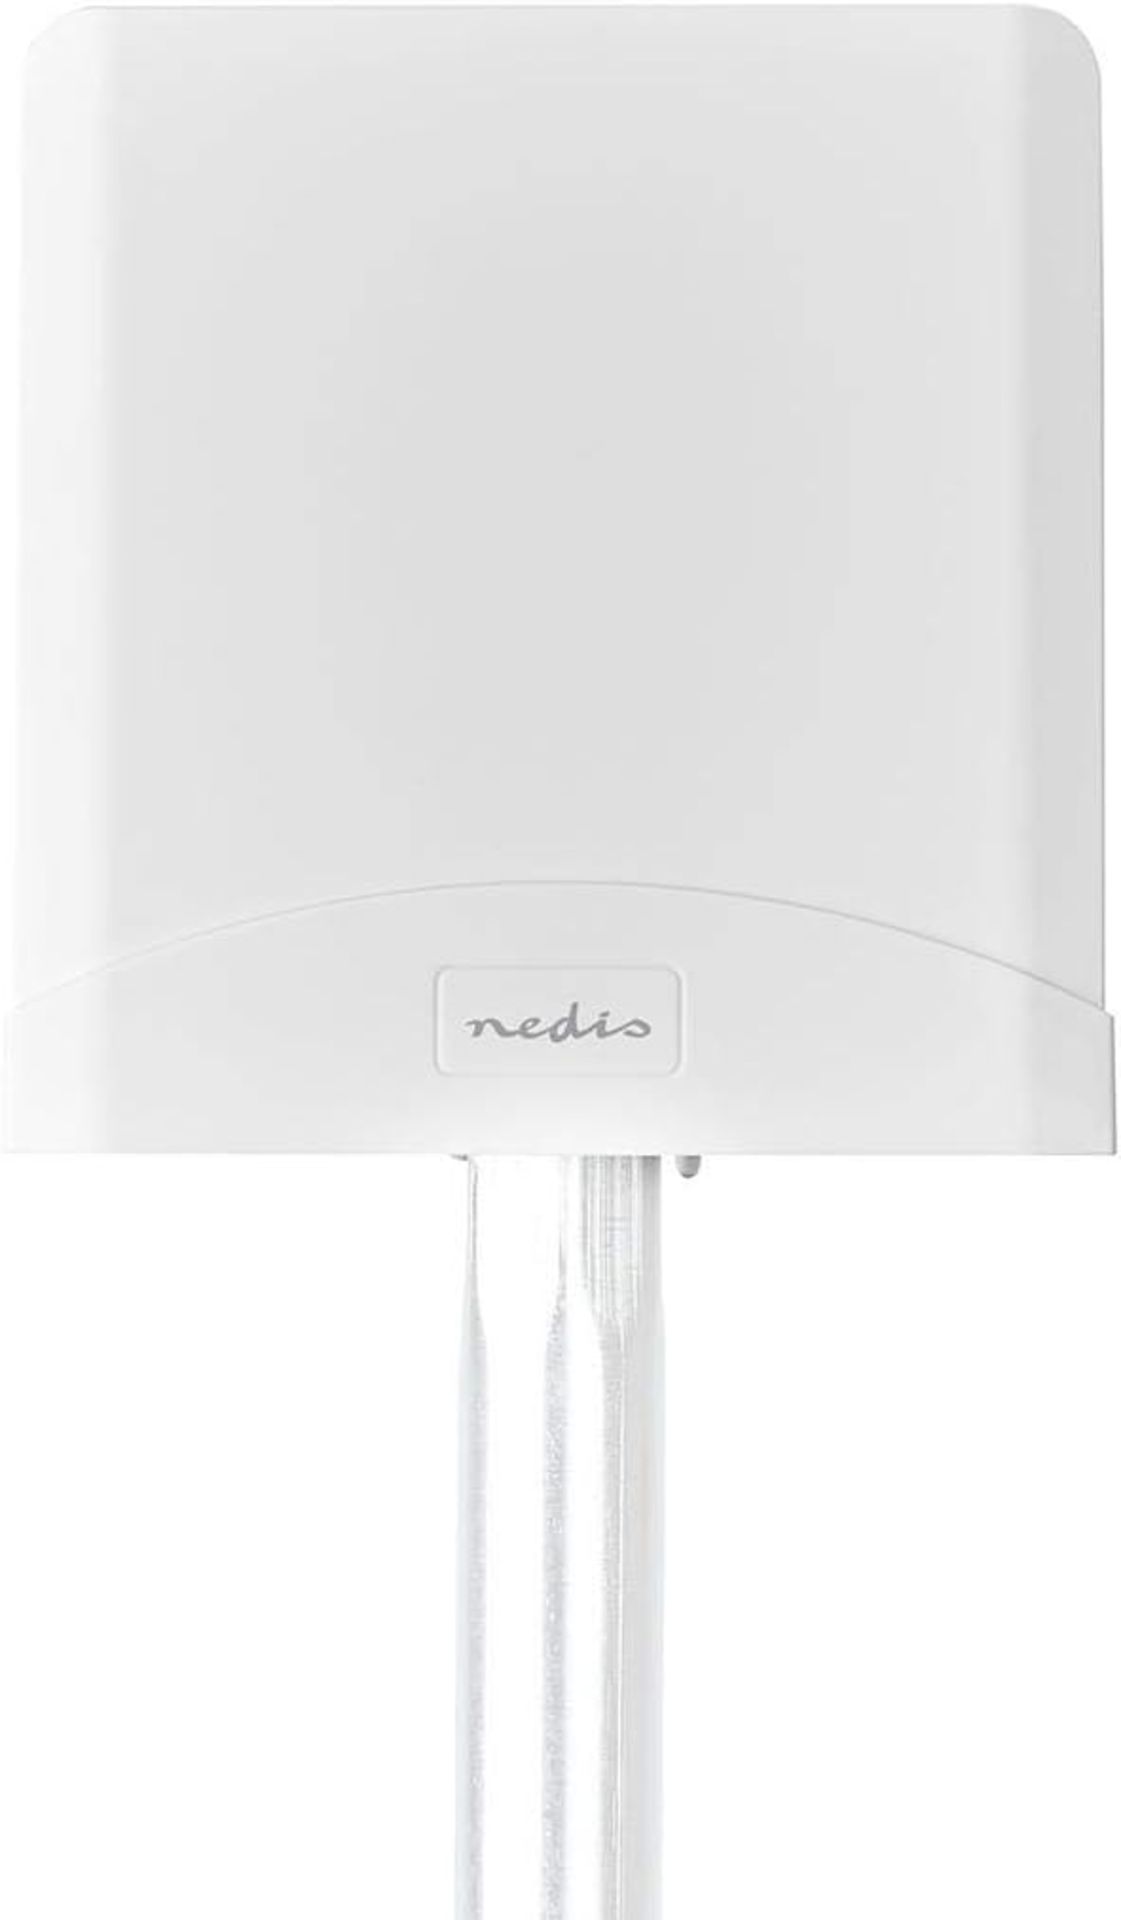 Nedis 5G / 4G / 3G Antenna for Reliable Signal Reception with 2.5m LMR200 Cable, 698-5000 MHz,